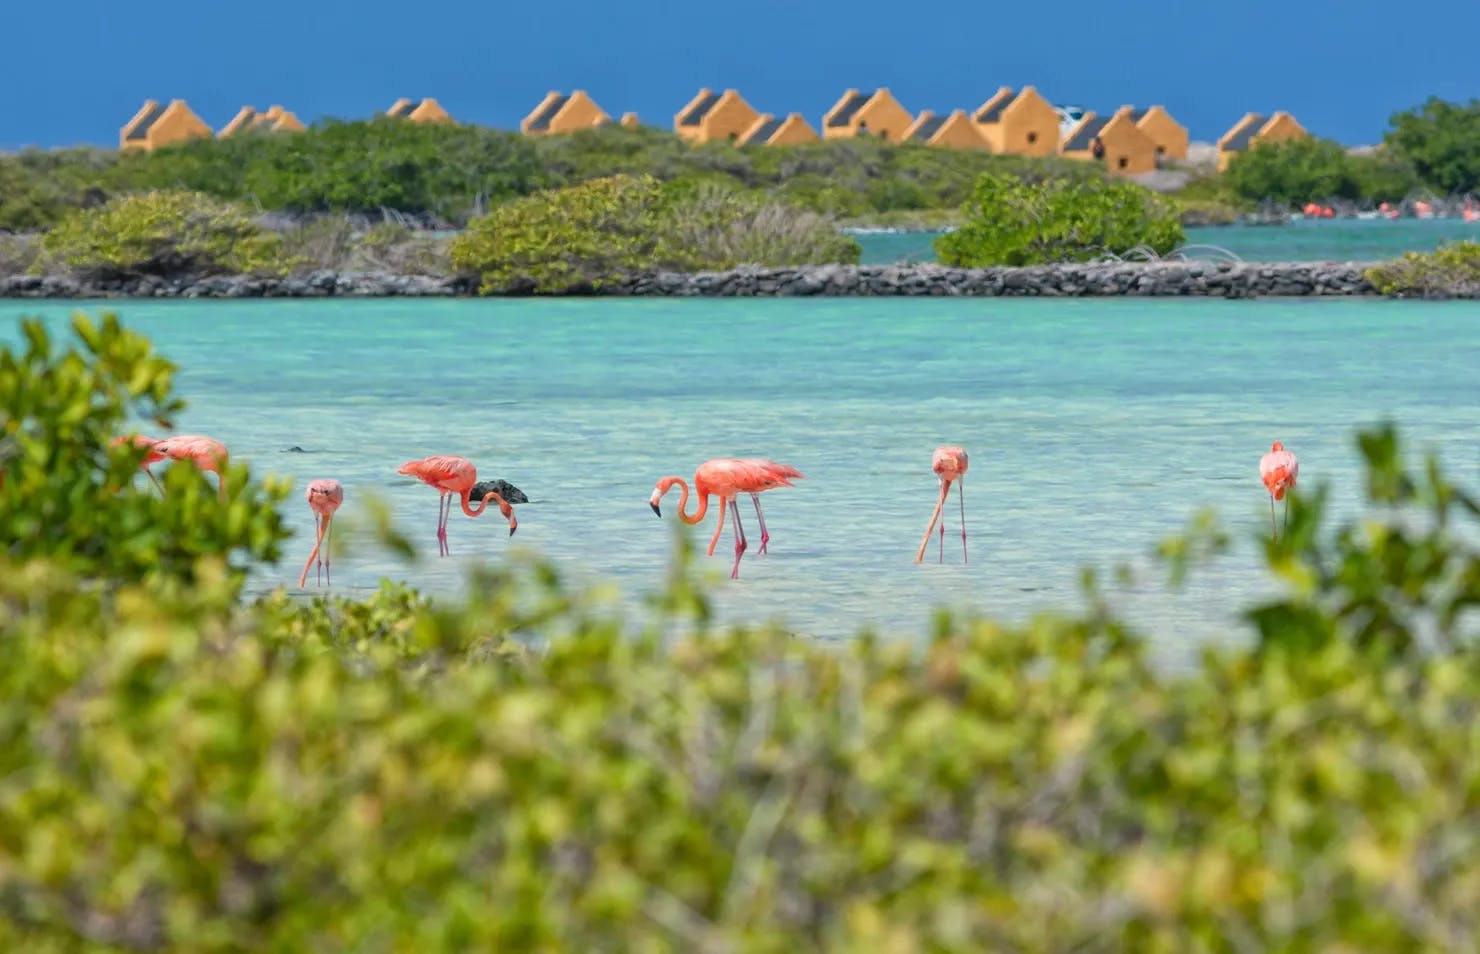 Flamingos in a large pound in the southern part of Bonaire, the Caribbean